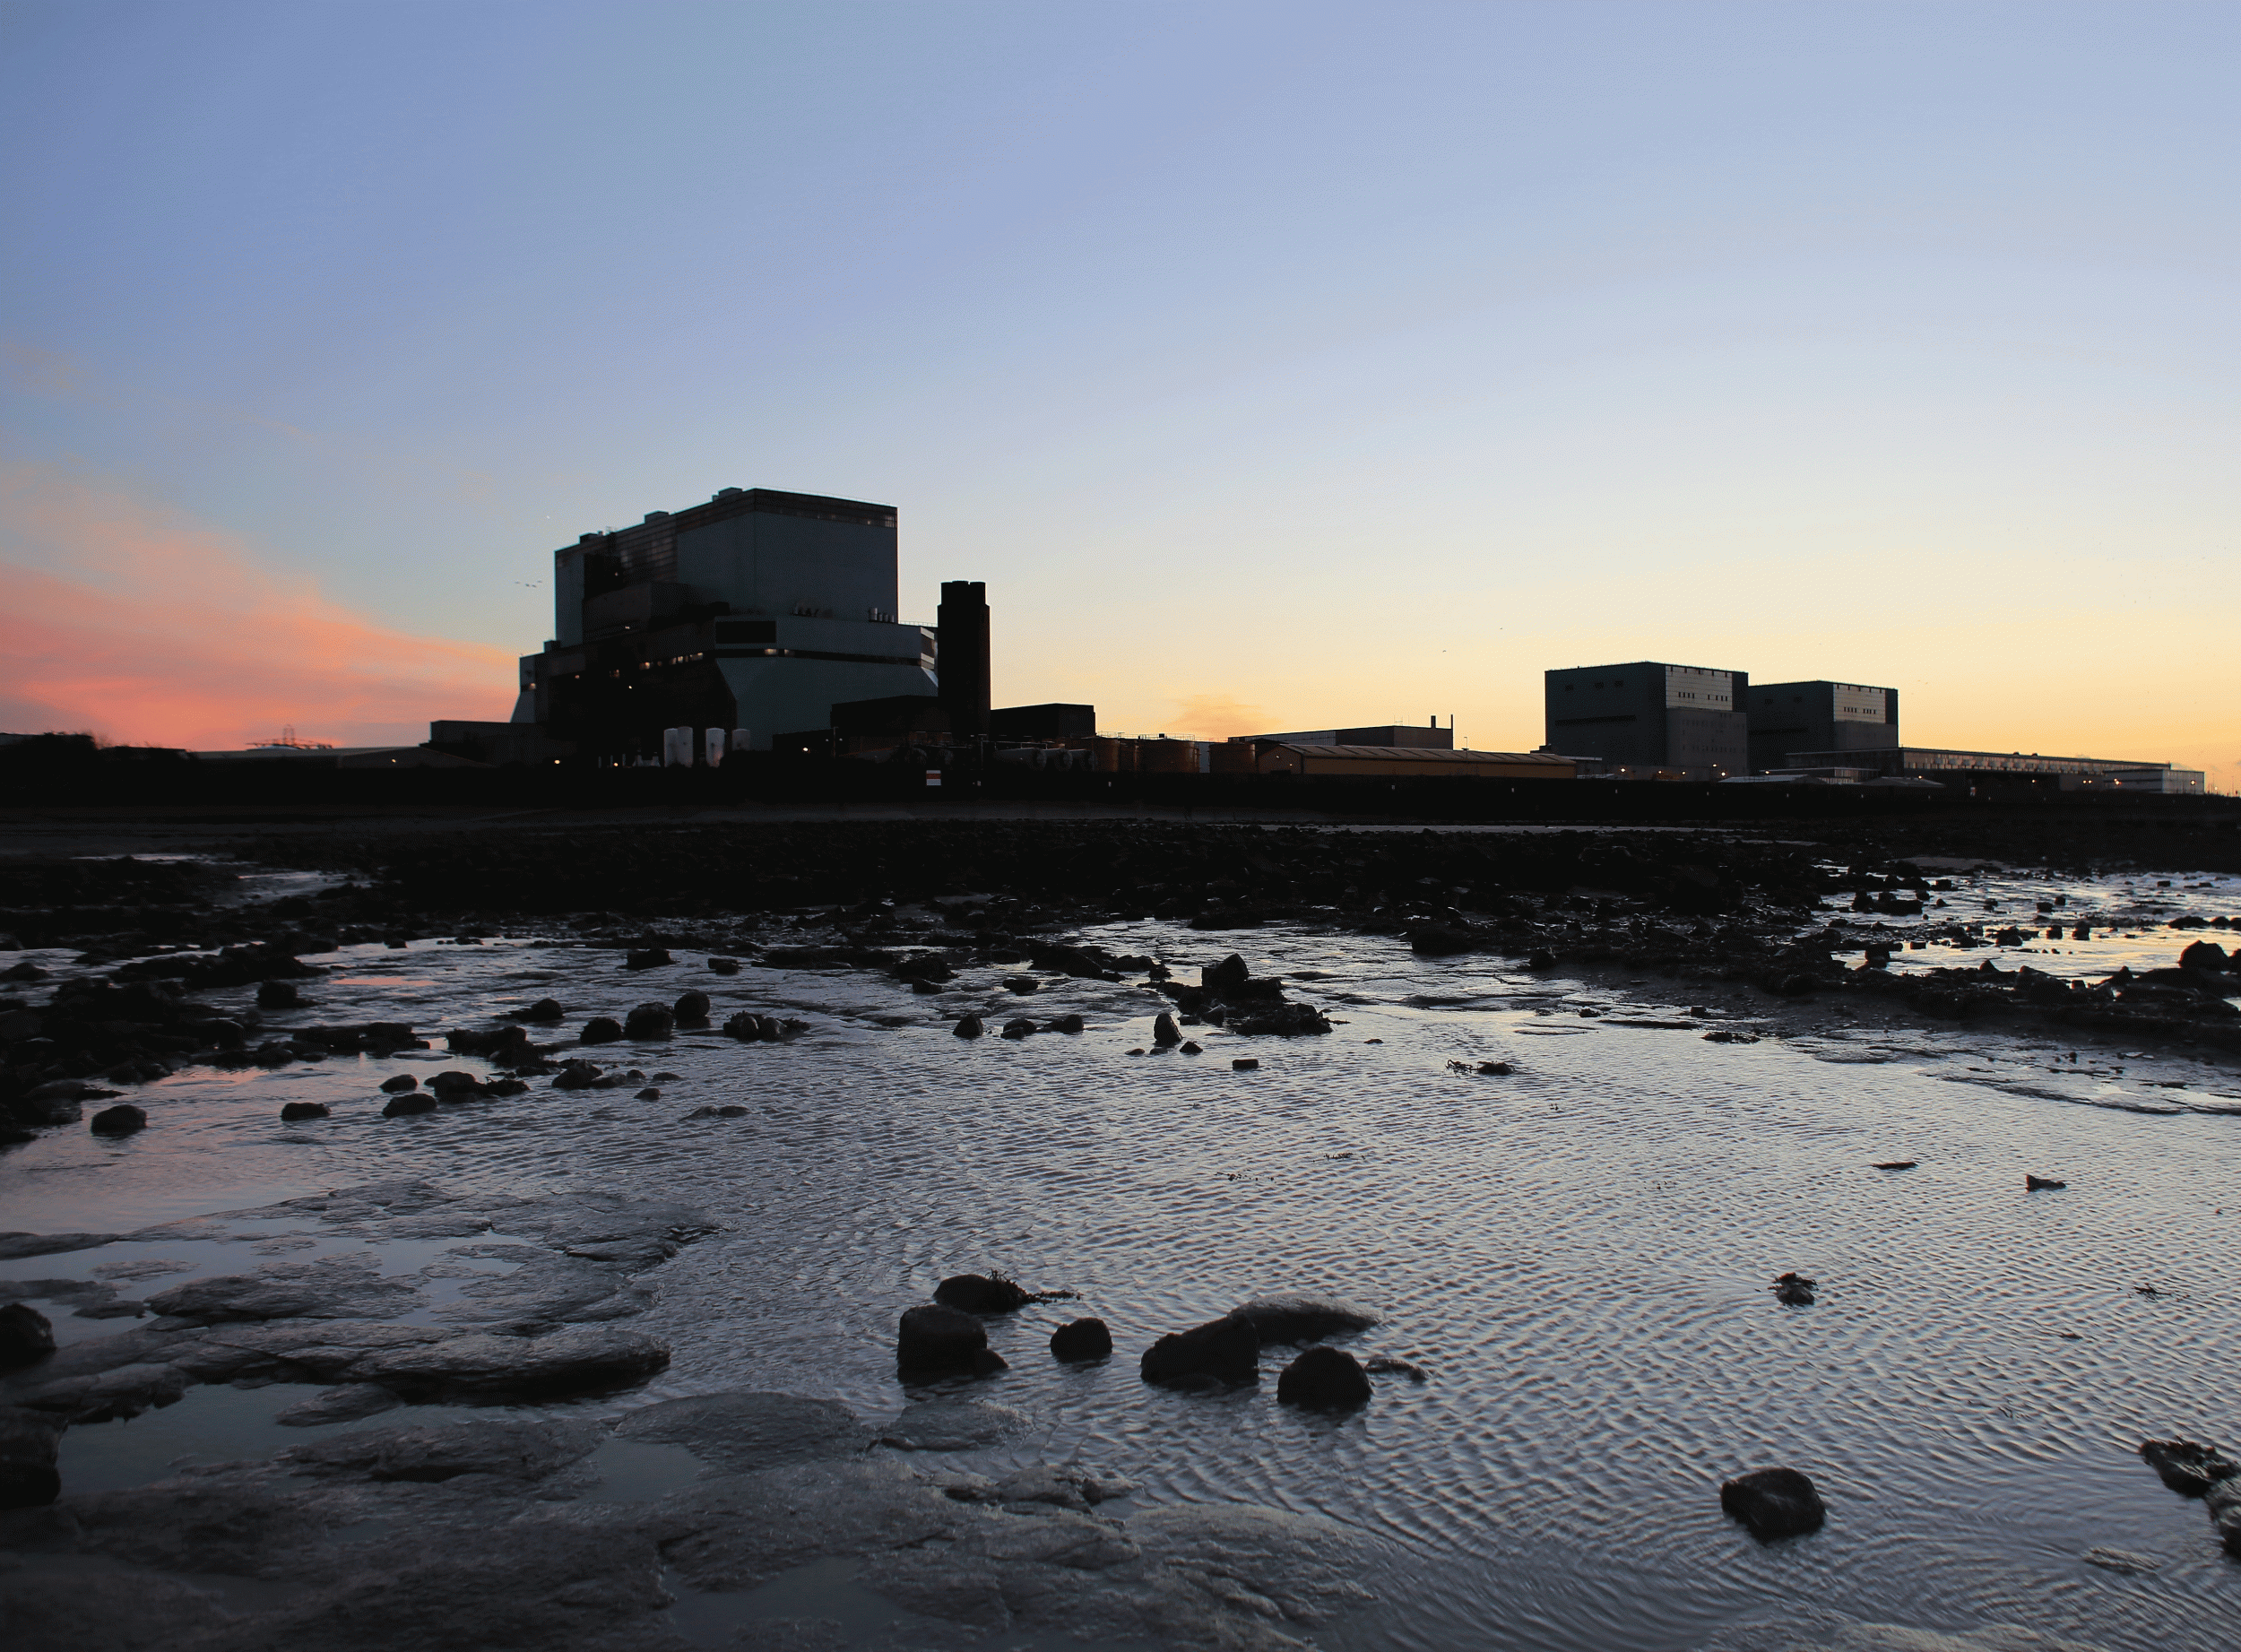 UK households could pay more than bargained for Hinkley nuclear plant